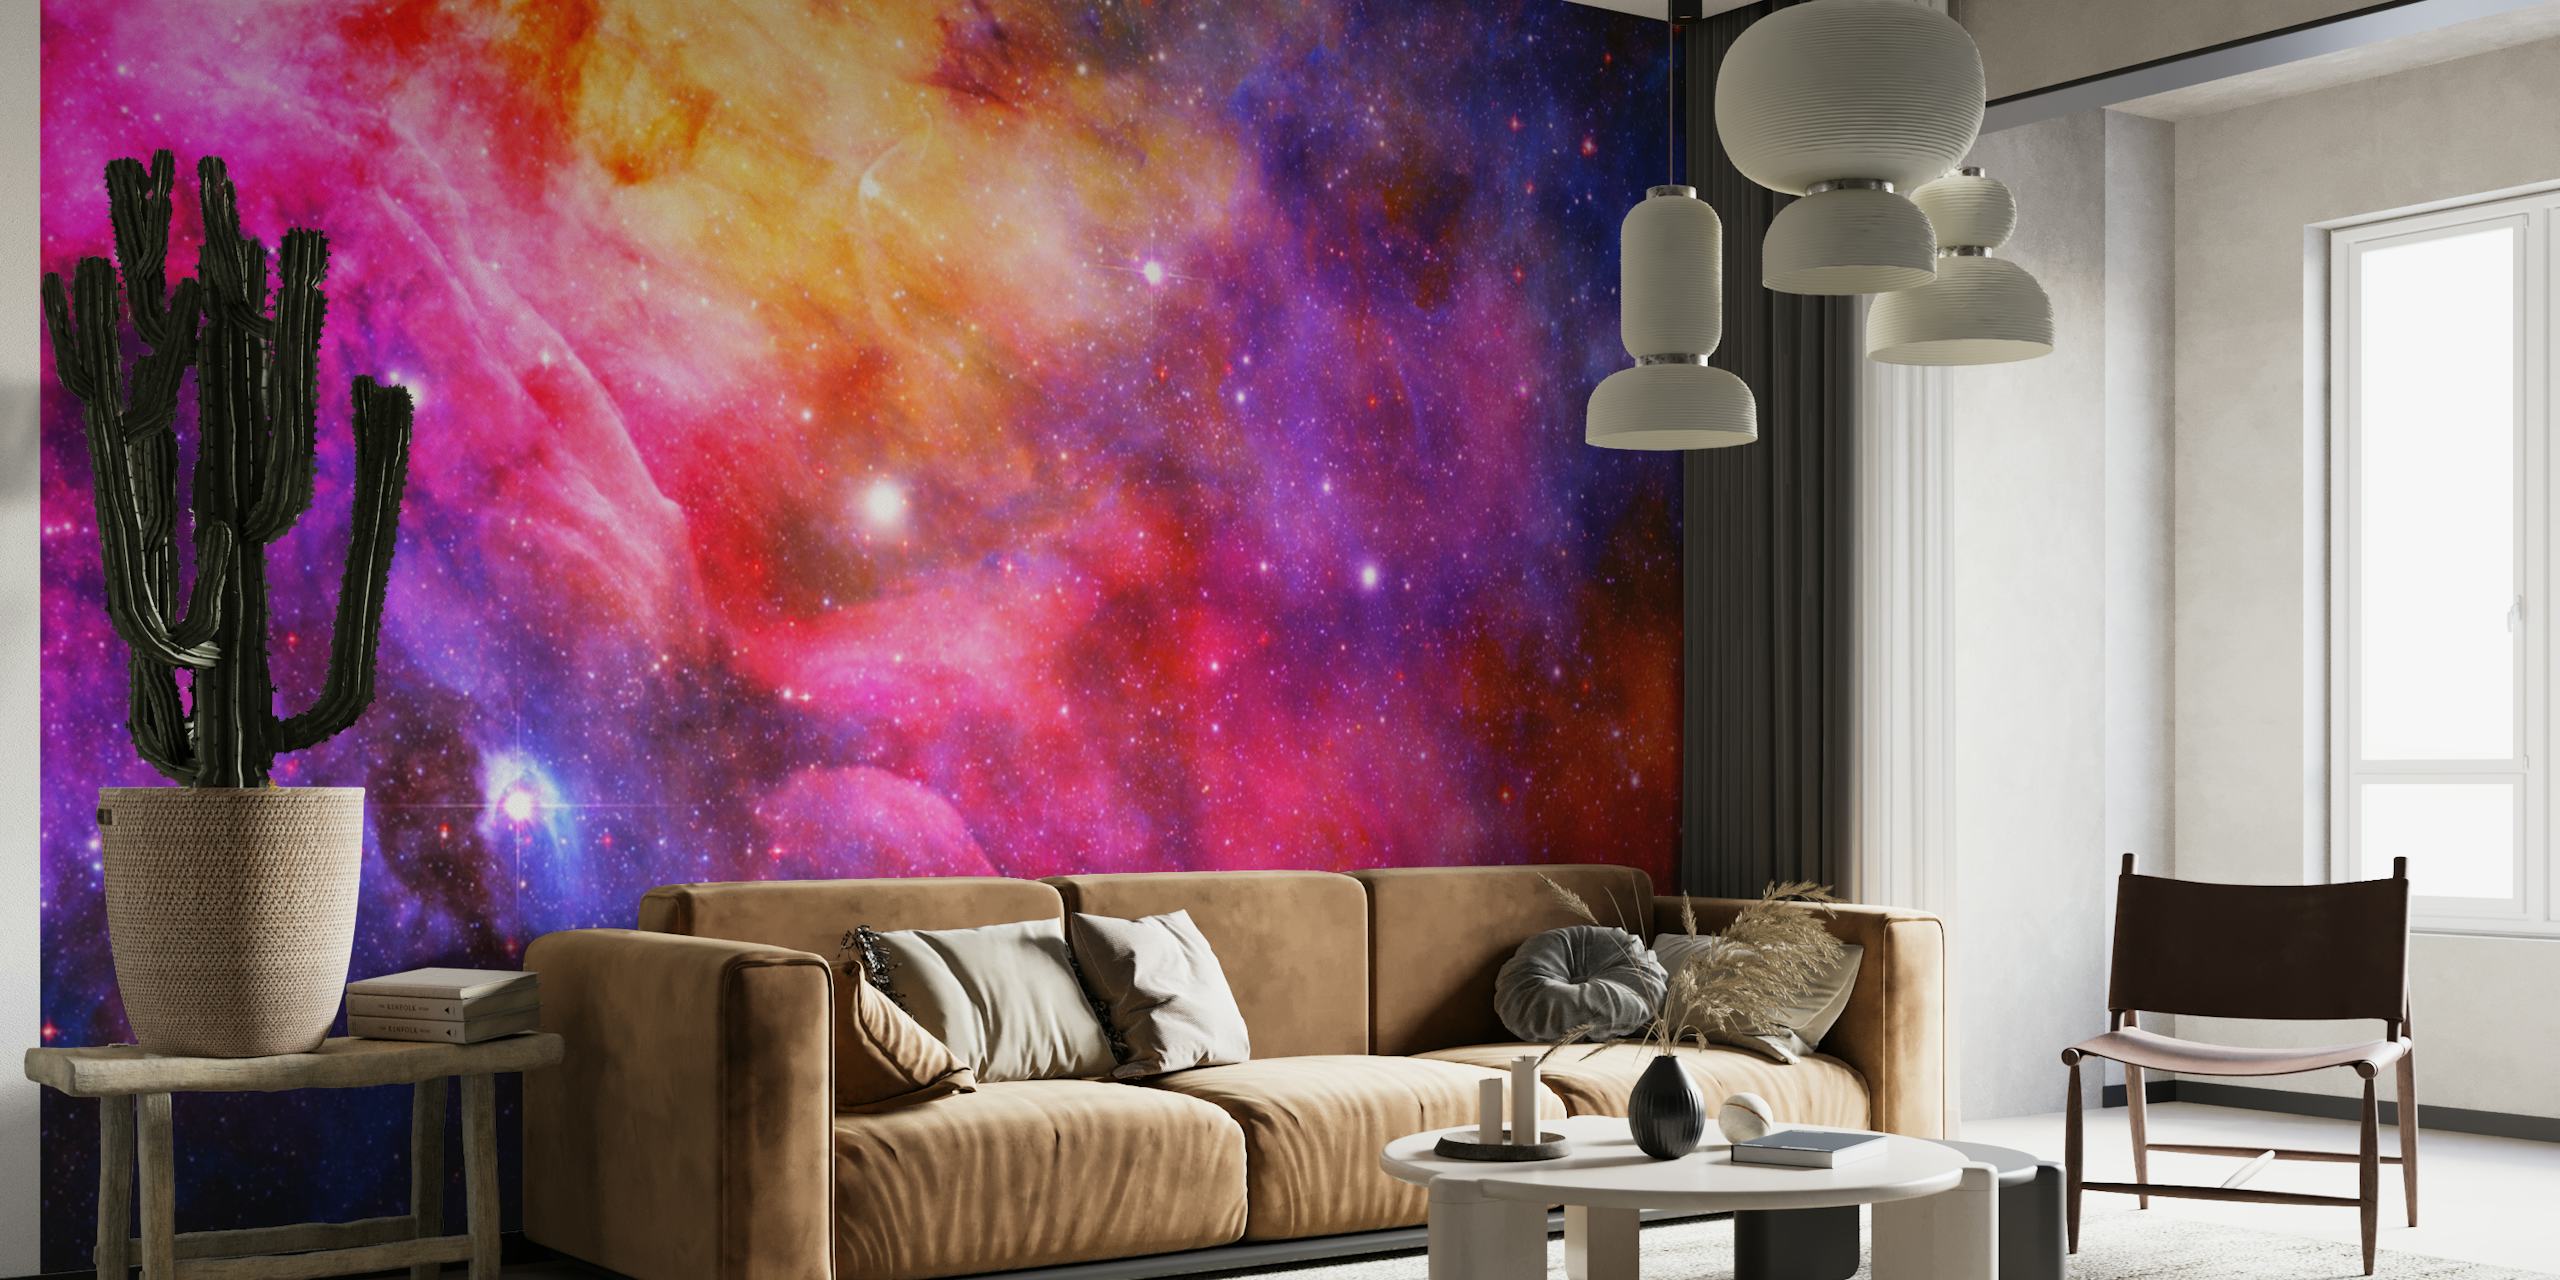 Colorful outer space galaxy wall mural with stars and nebula patterns